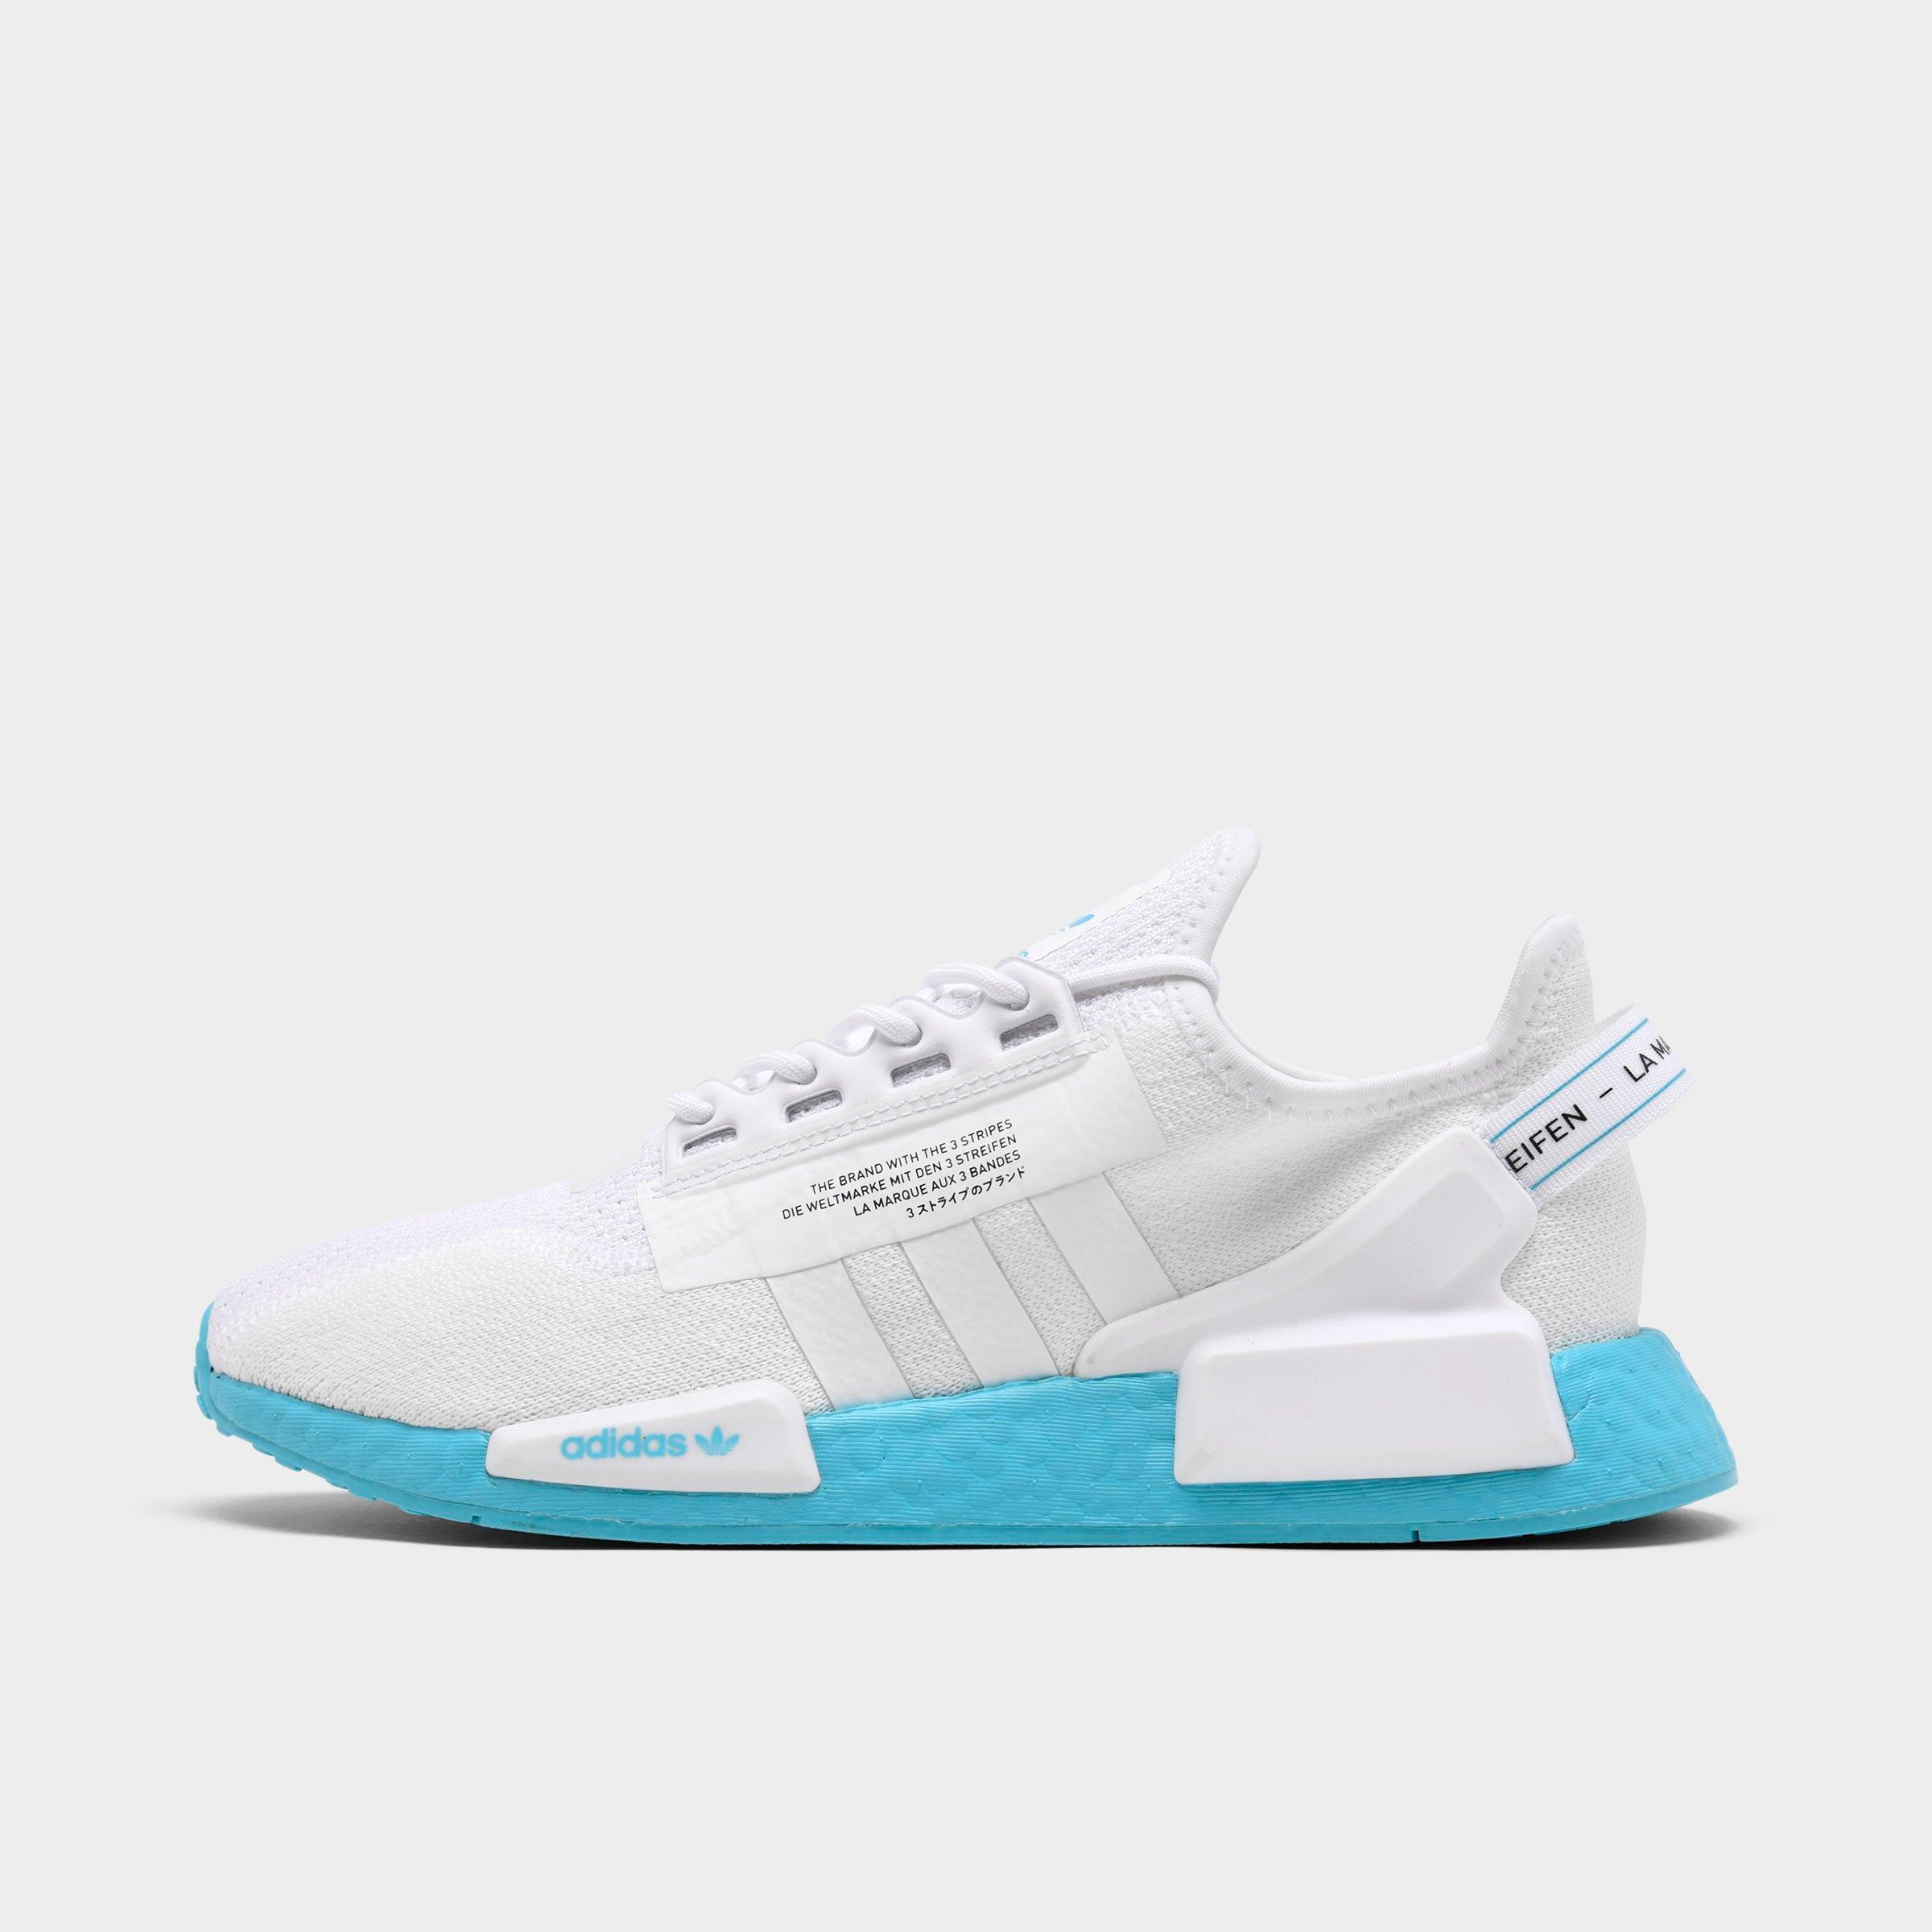 Adidas Nmd R1 Shoes Womenshoes Clothing and Bags